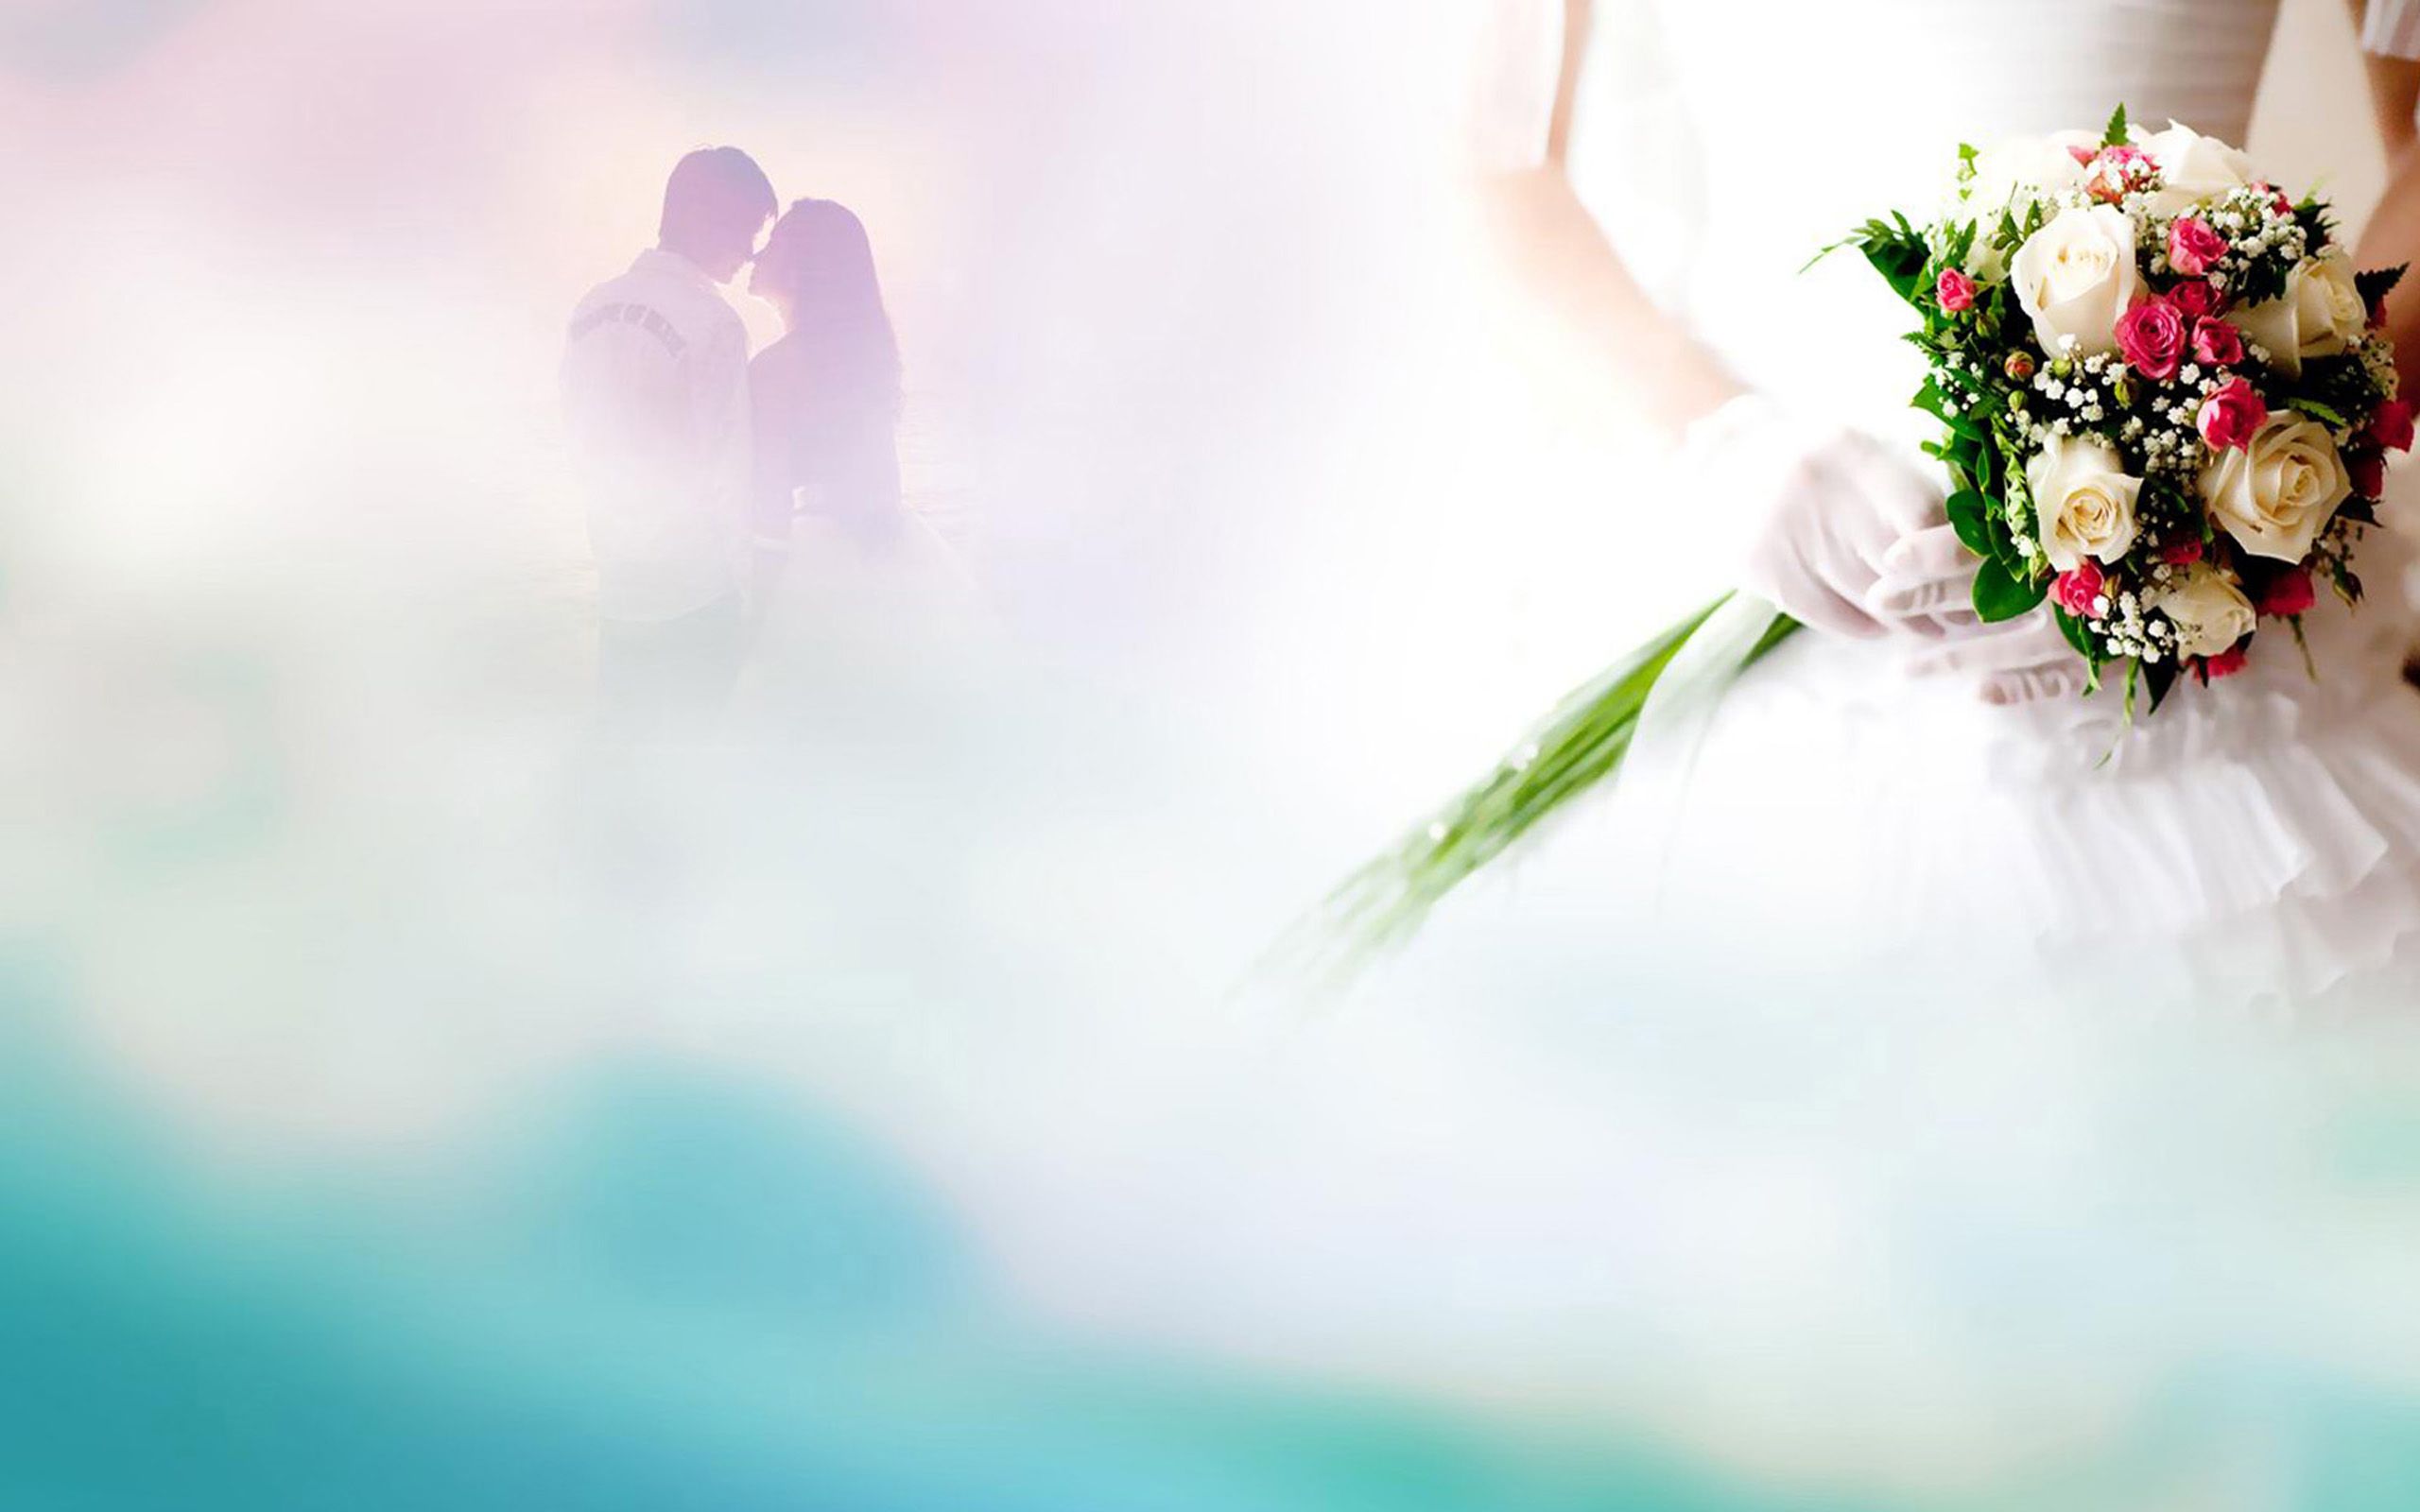 Best Background For Wedding Pictures